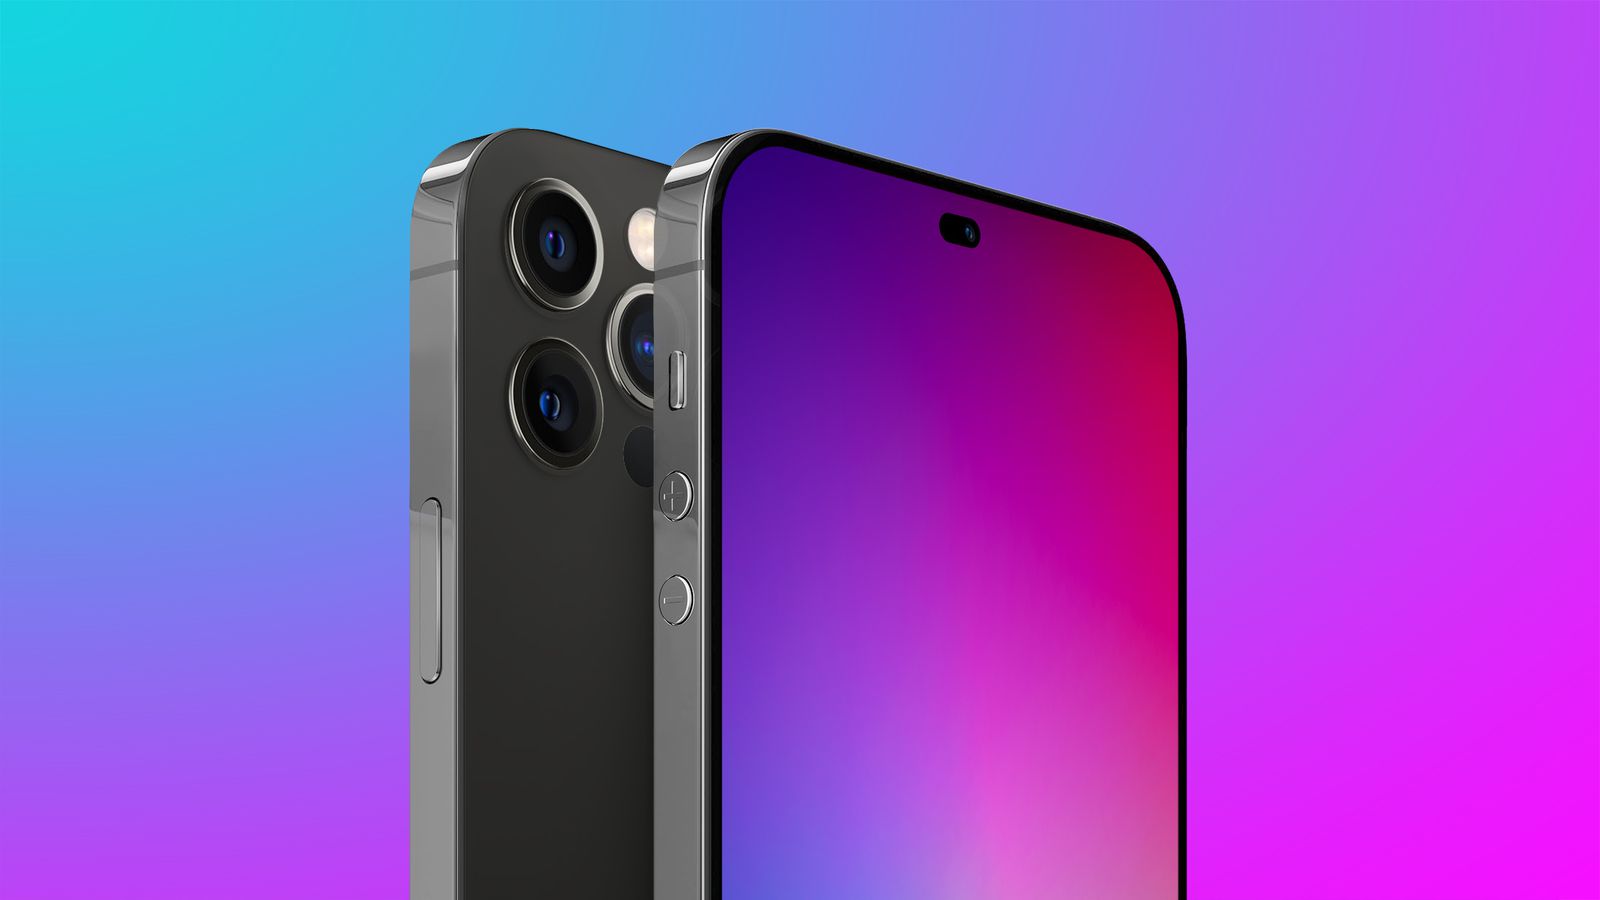 Leaker Says iPhone 14 Pro to Feature Pill-Shaped Camera Cutout With Face ID Under the Display - MacRumors